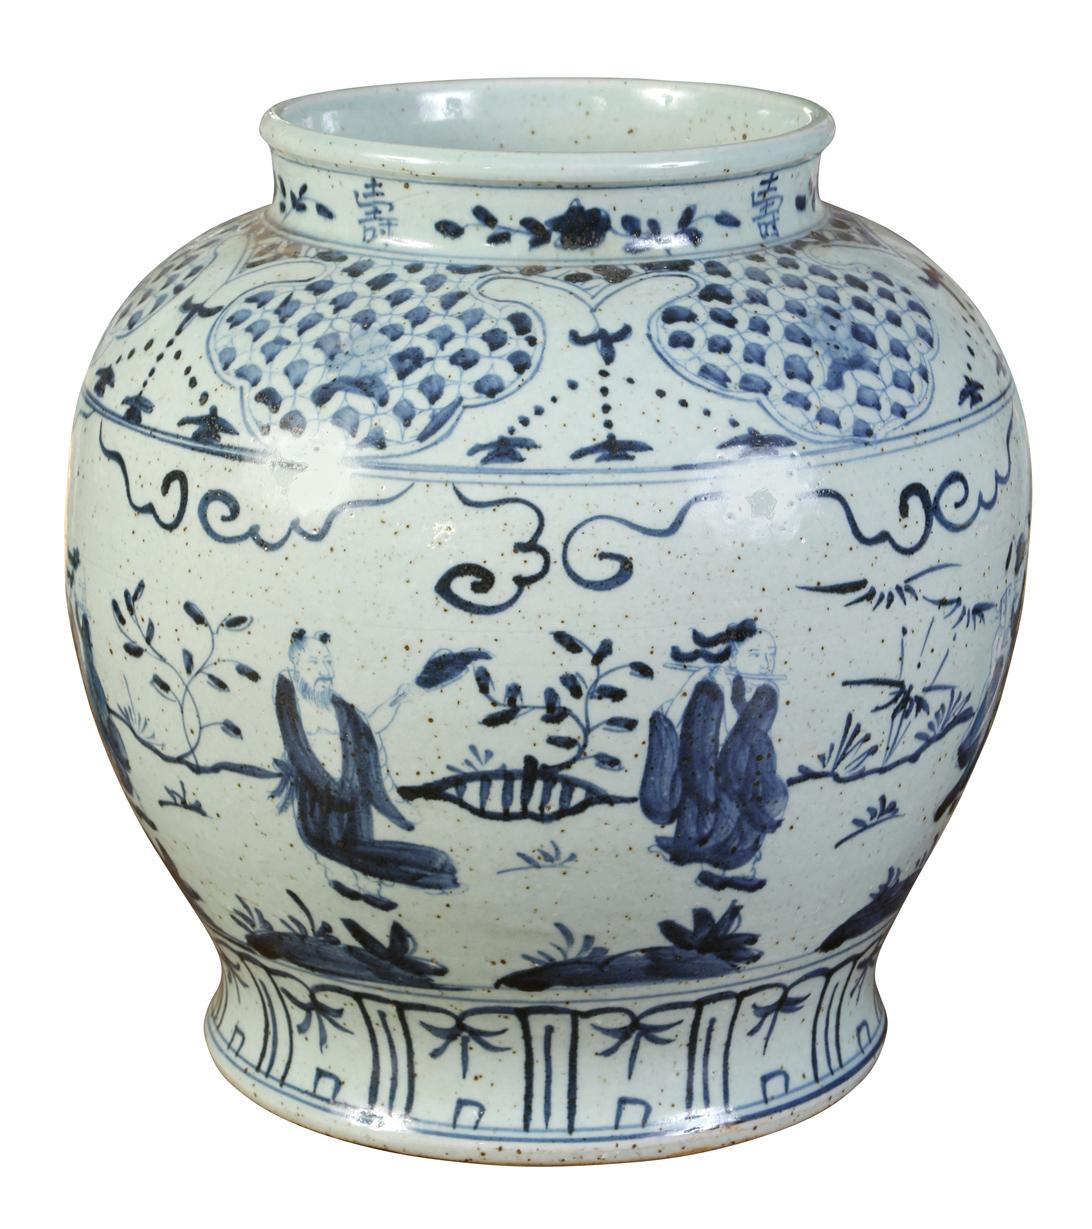 Blue and white will never go out a fashion. This large vase, decorated with figures and decorative accents, is perfect as a stand-alone decoration or as a vase.